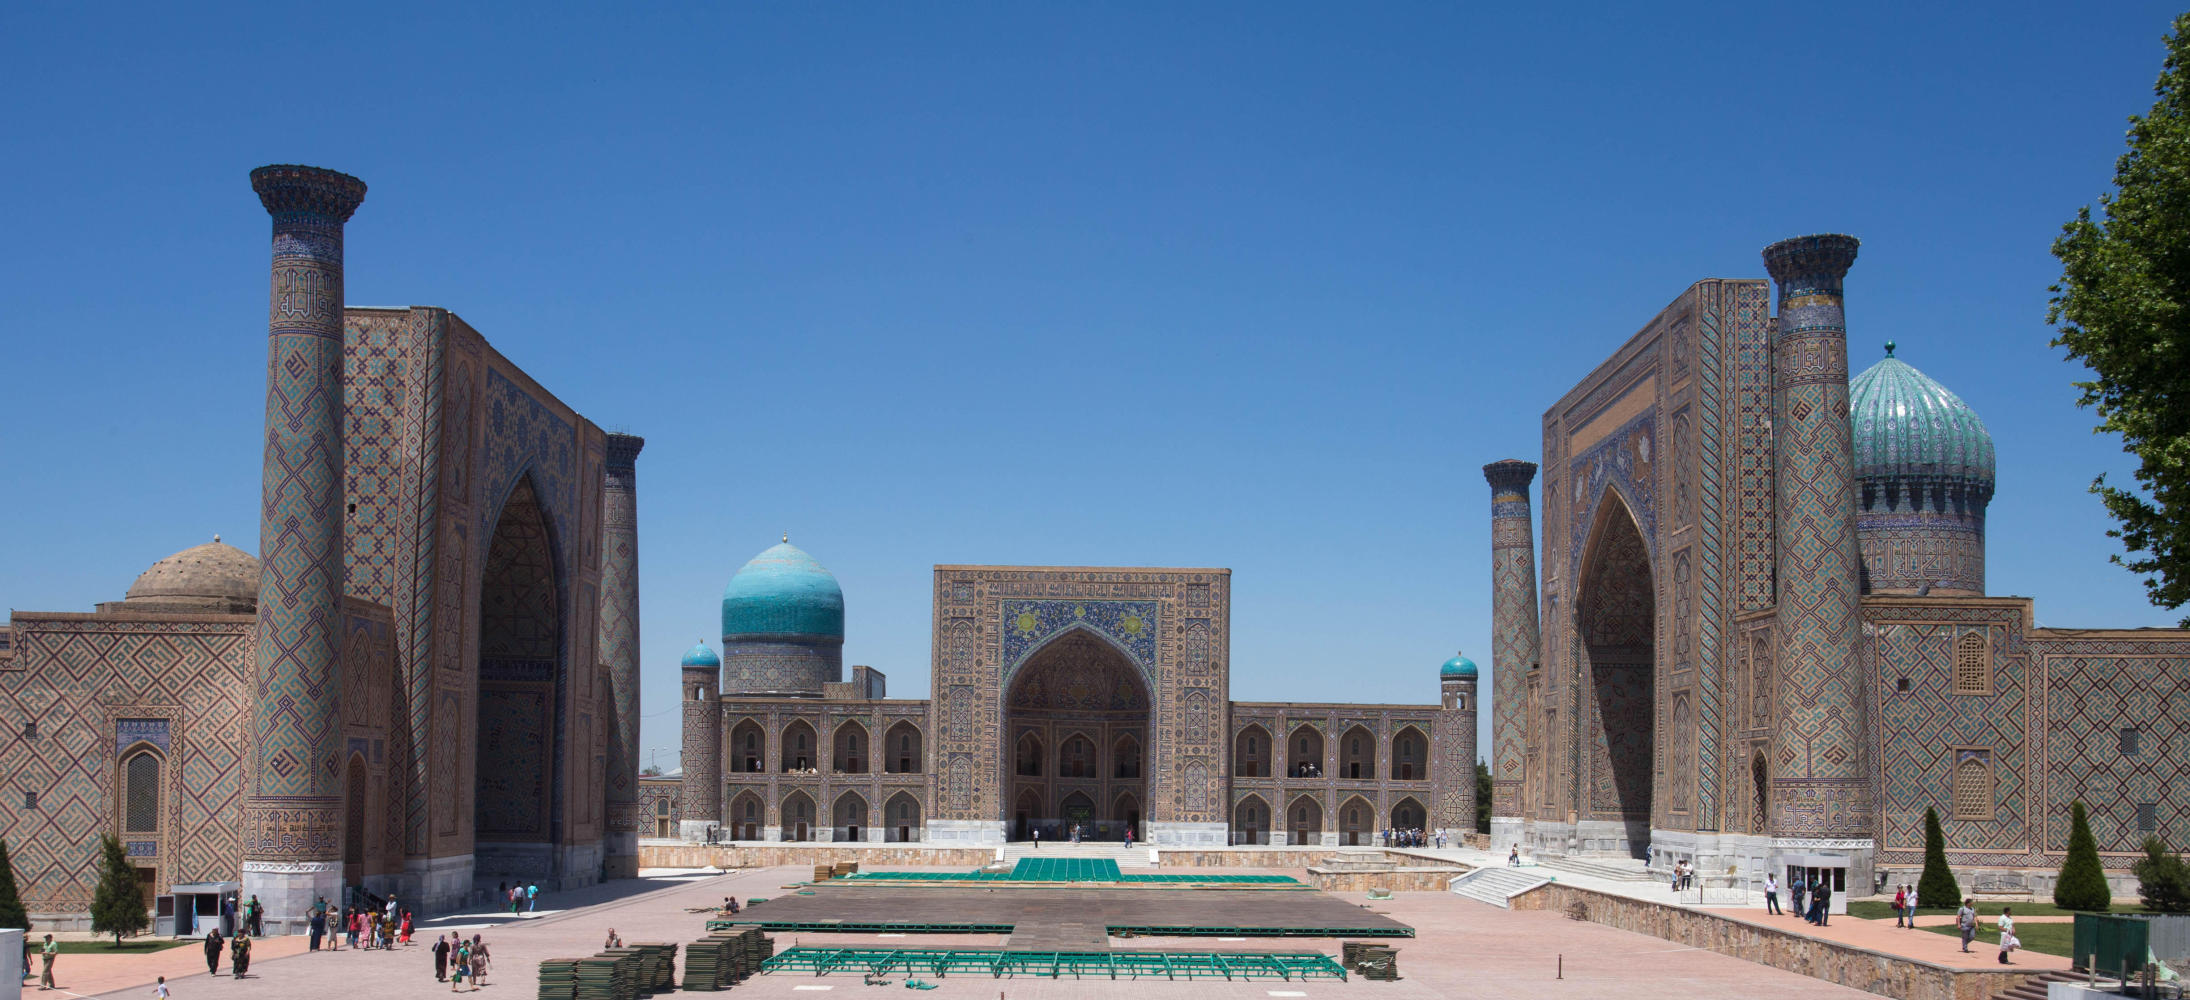 Leaving my bike in Qarshi, I took a quick side trip to see the Registan in Samarkand